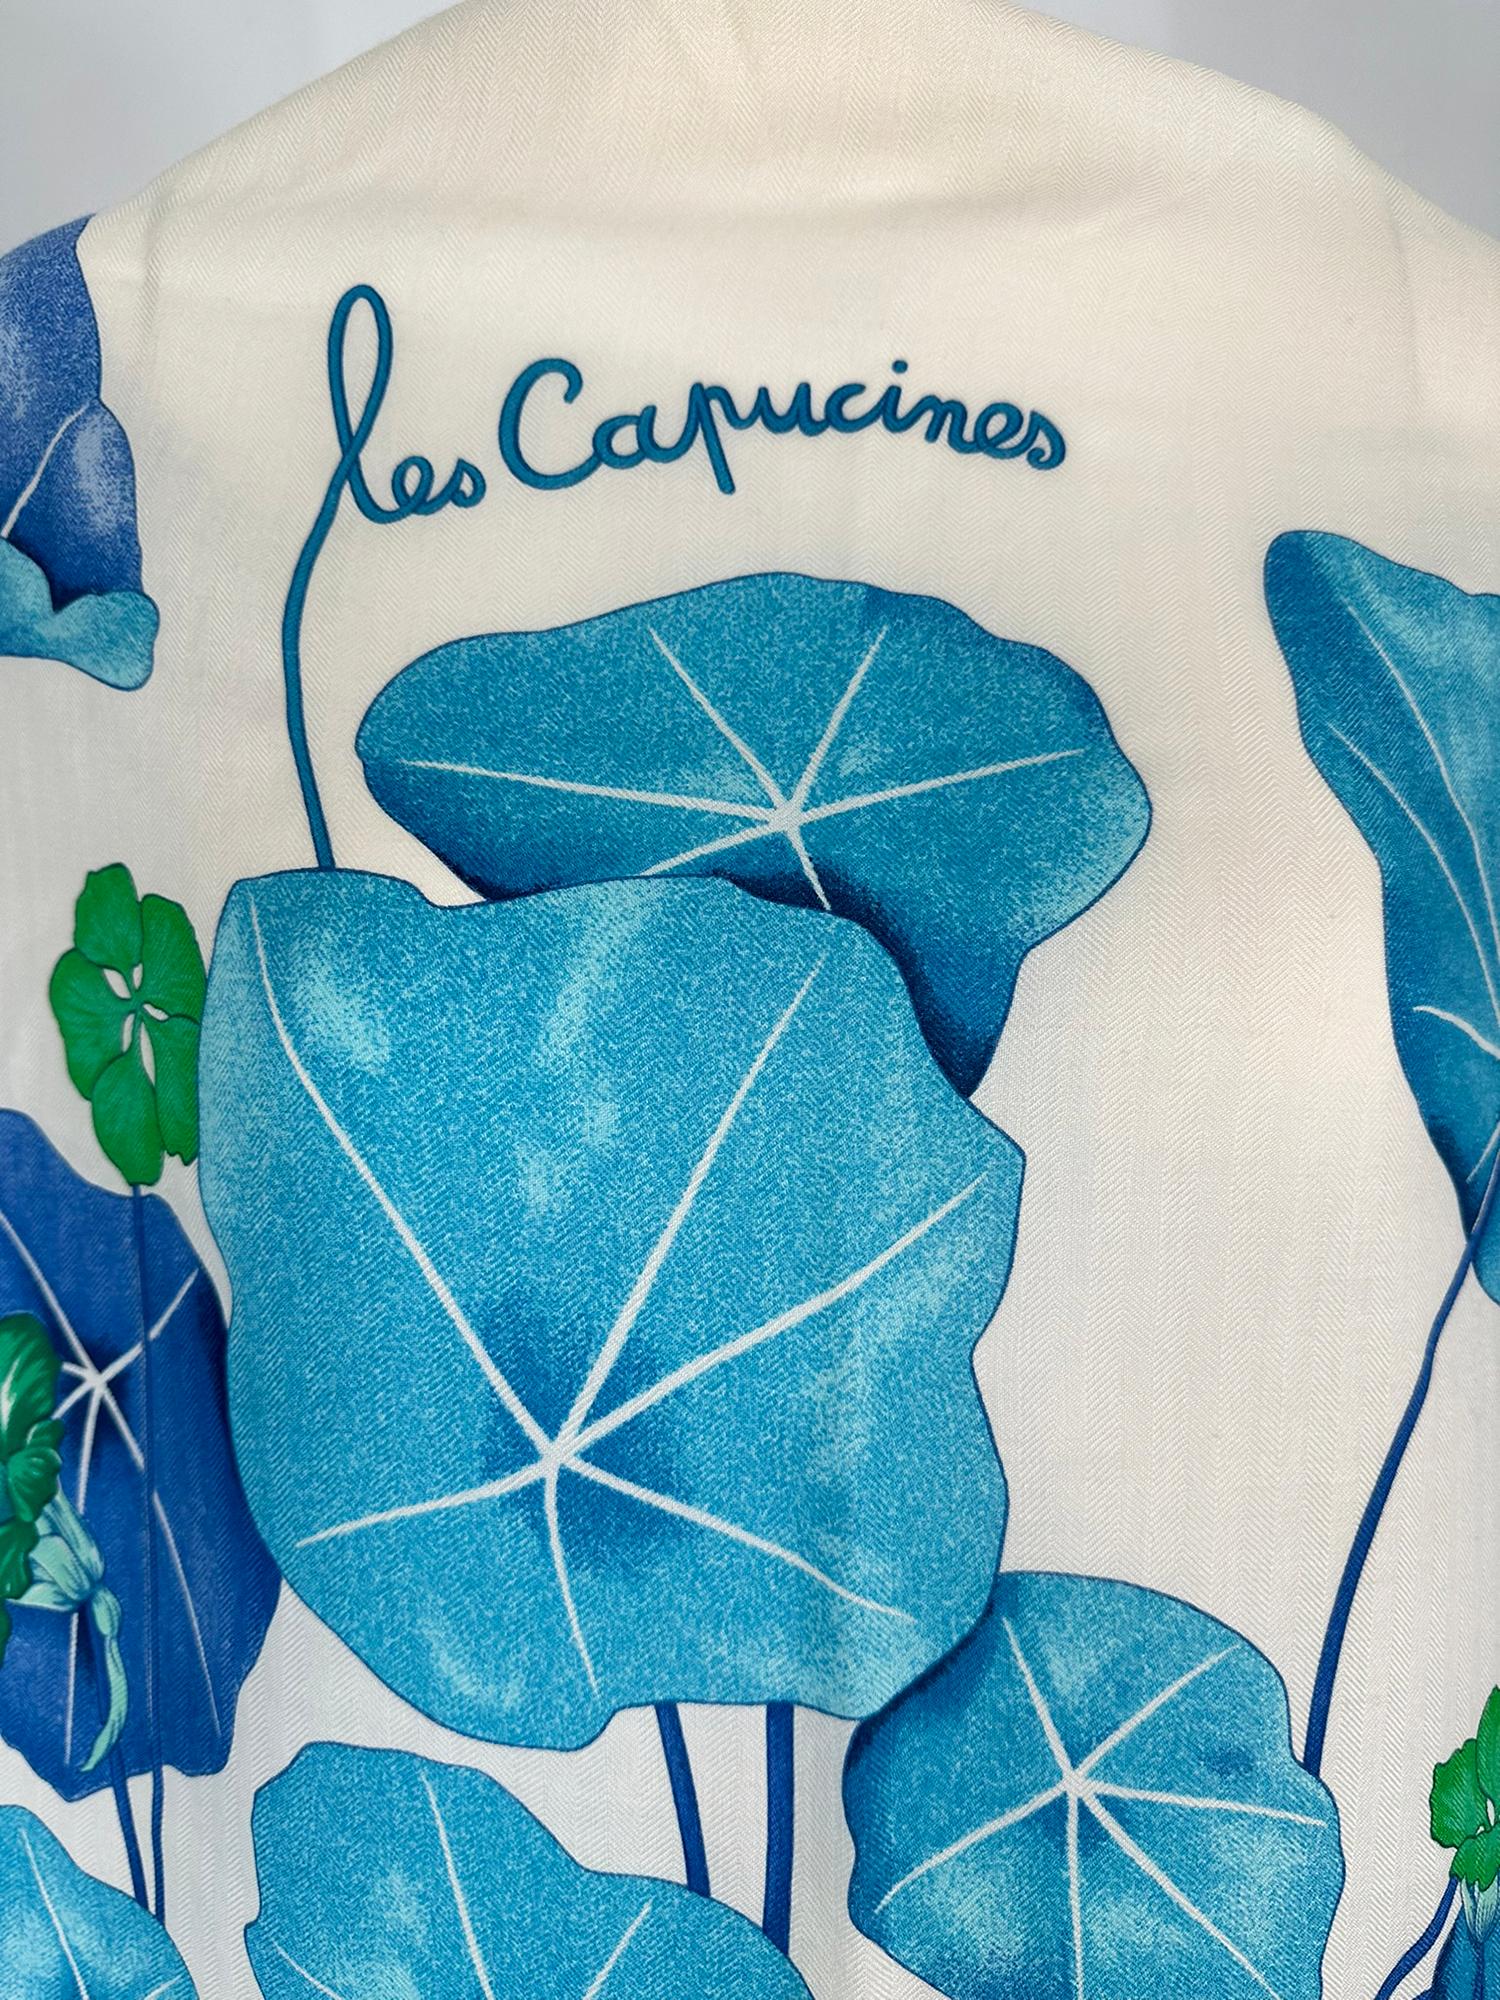 Rare to find Hermes Les Capucines GM 140  by Antoine de Jacquelot in cream, blues and greens 65% cashmere & 35% silk shawl. Cream ground with blue nasturtiums twining throughout. Lovely large scale flowers. In excellent unused condition, with